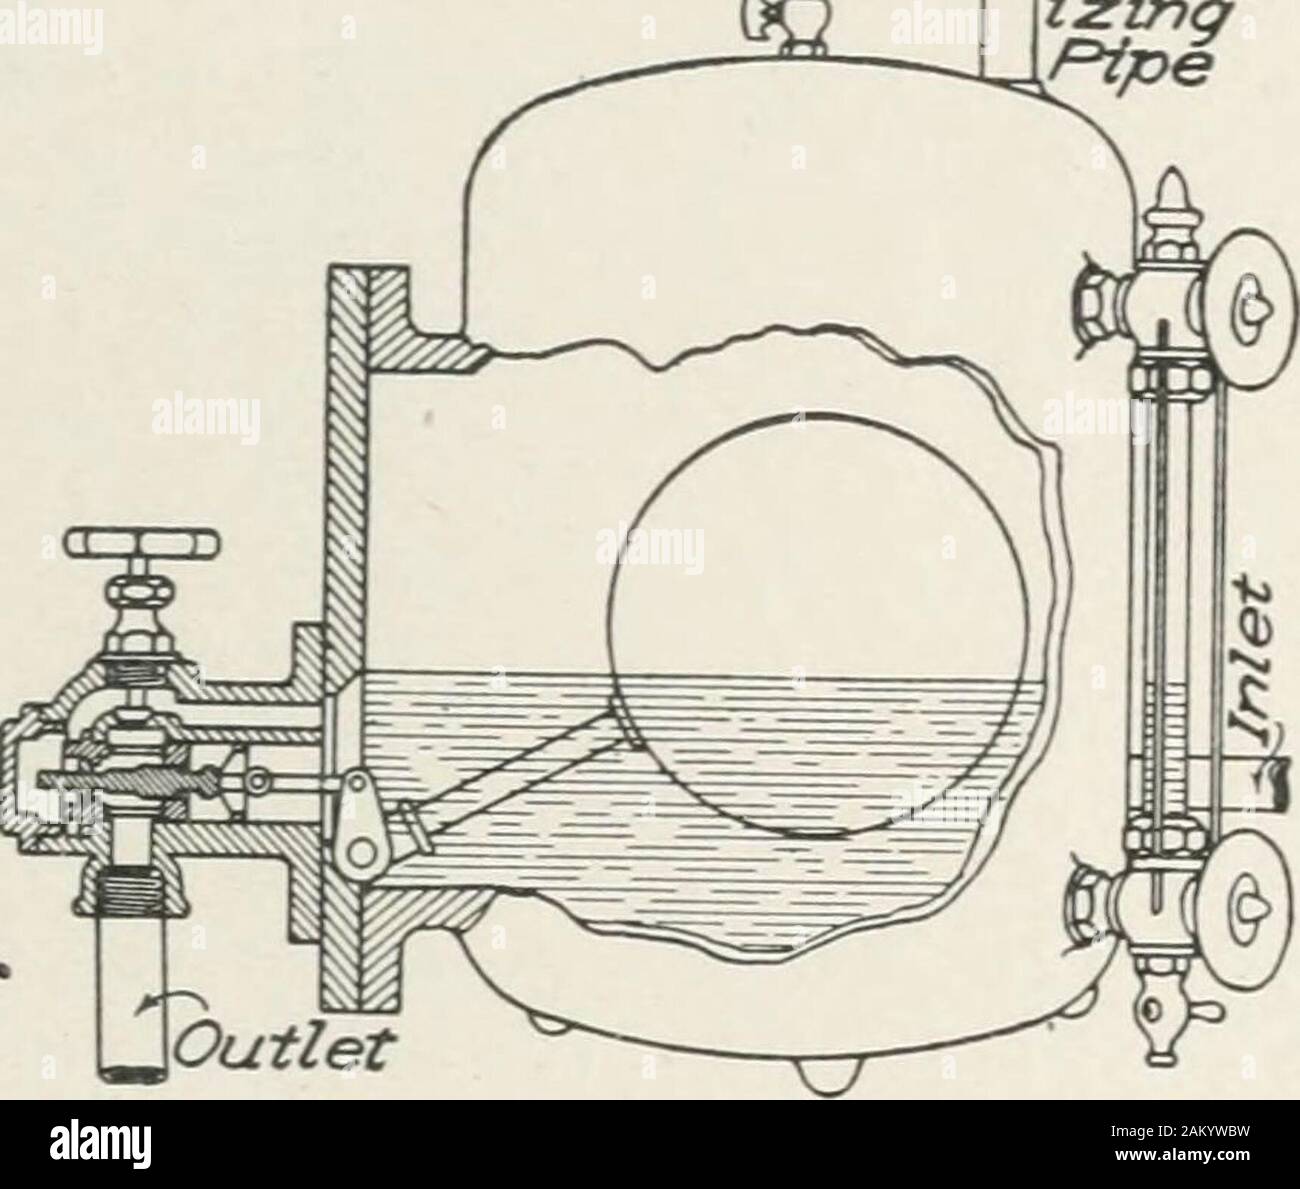 Cyclopedia of heating, plumbing and sanitation; a complete reference work . Fig, it). KisiTs Drained i Mam and MainDrained at End. monly drained as shown in Fig. ID, connections being taken fromthe bottom of the main and the heel of the riser. Risers are not in-frequently drained to the main, which in turn is drained at the end(see Fig. 26). This arrangement requires Less fitting than when the Equalizing Pipe Over Flow Artificial Water Stand Pipe Line Main Return o= ^ Fig. 27. Showing Artificial Water T.ine. risers are relieved at the base, as shown in Fig. 20. If the mainsare long, they shoul Stock Photo